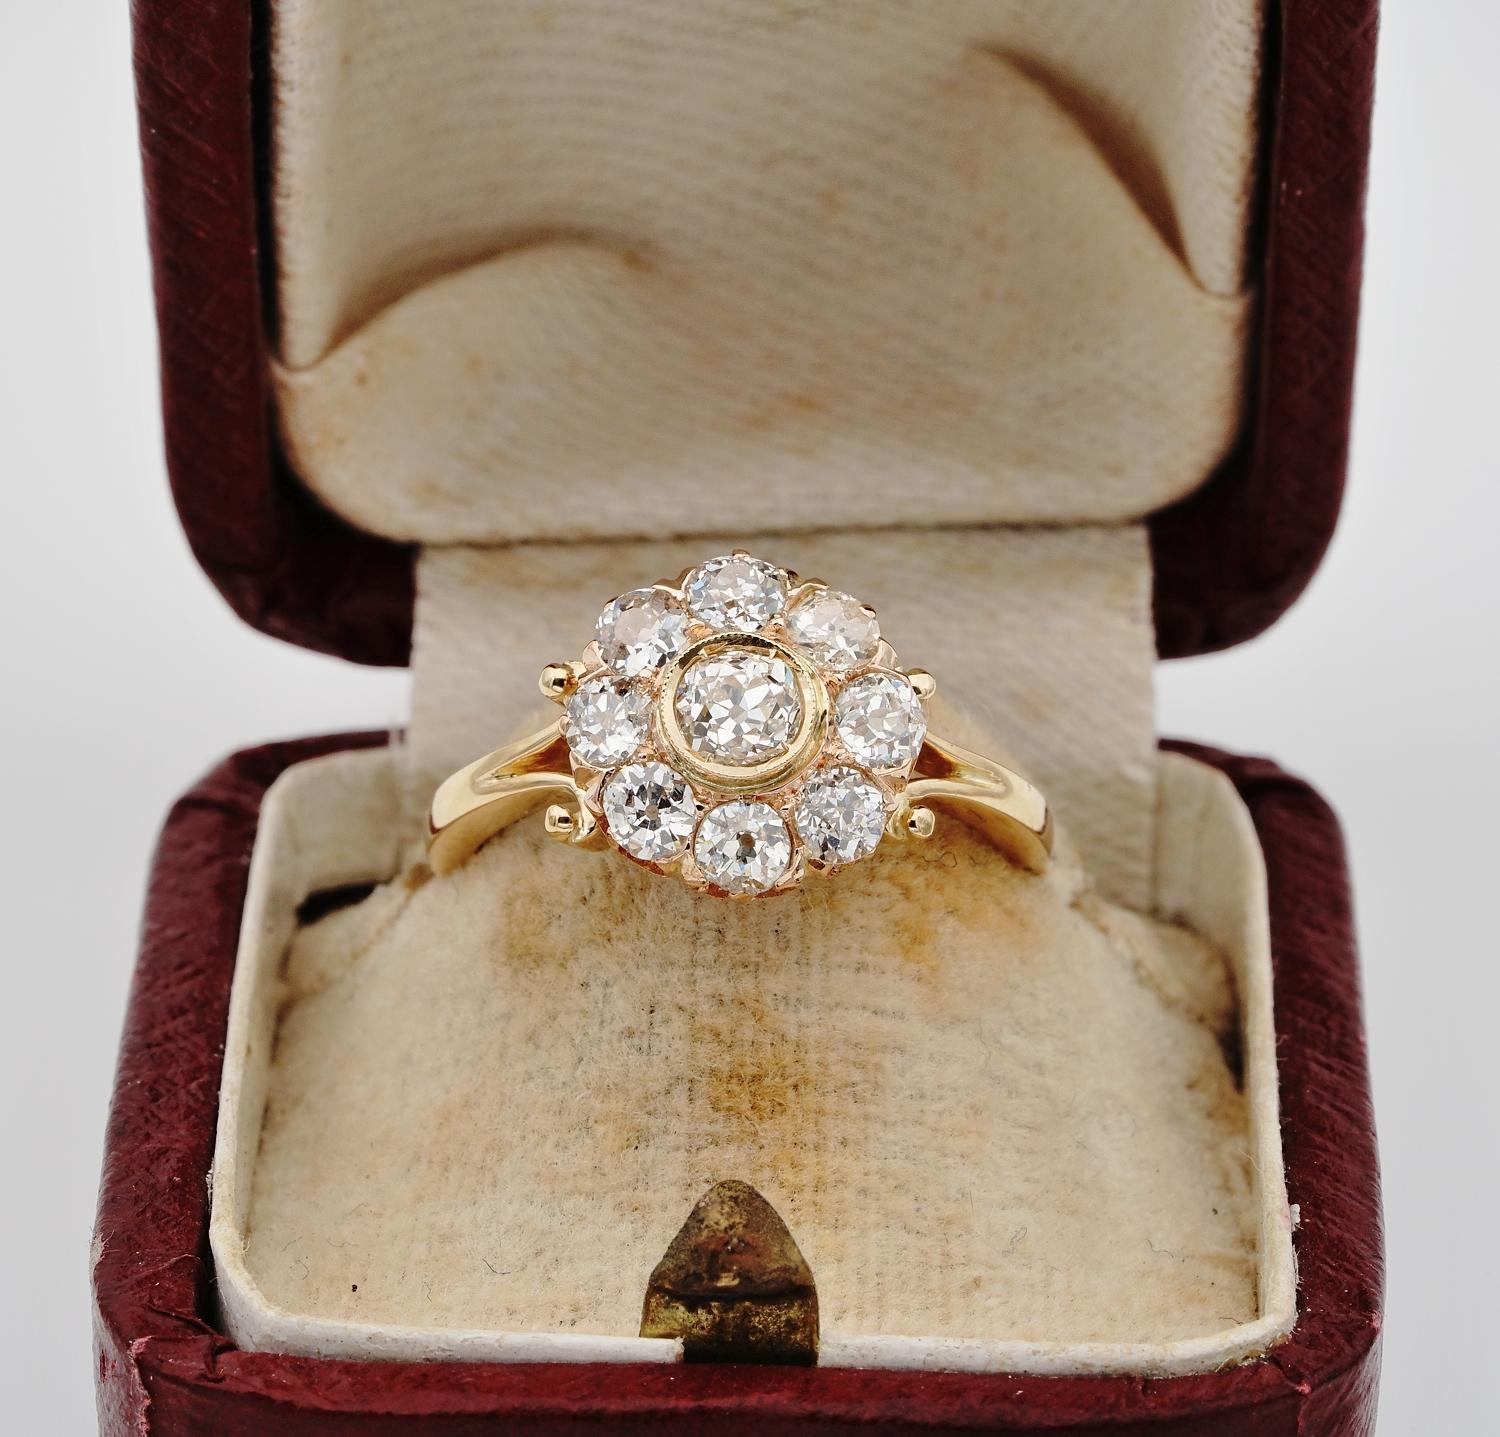 A Way to be unique

Rare and very beautiful example of original Victorian old mine cut Diamond cluster ring in most desired daisy shape.
Perfect option for engagement or anniversary or just pure pleasure for beautiful old things.
Gorgeously made of